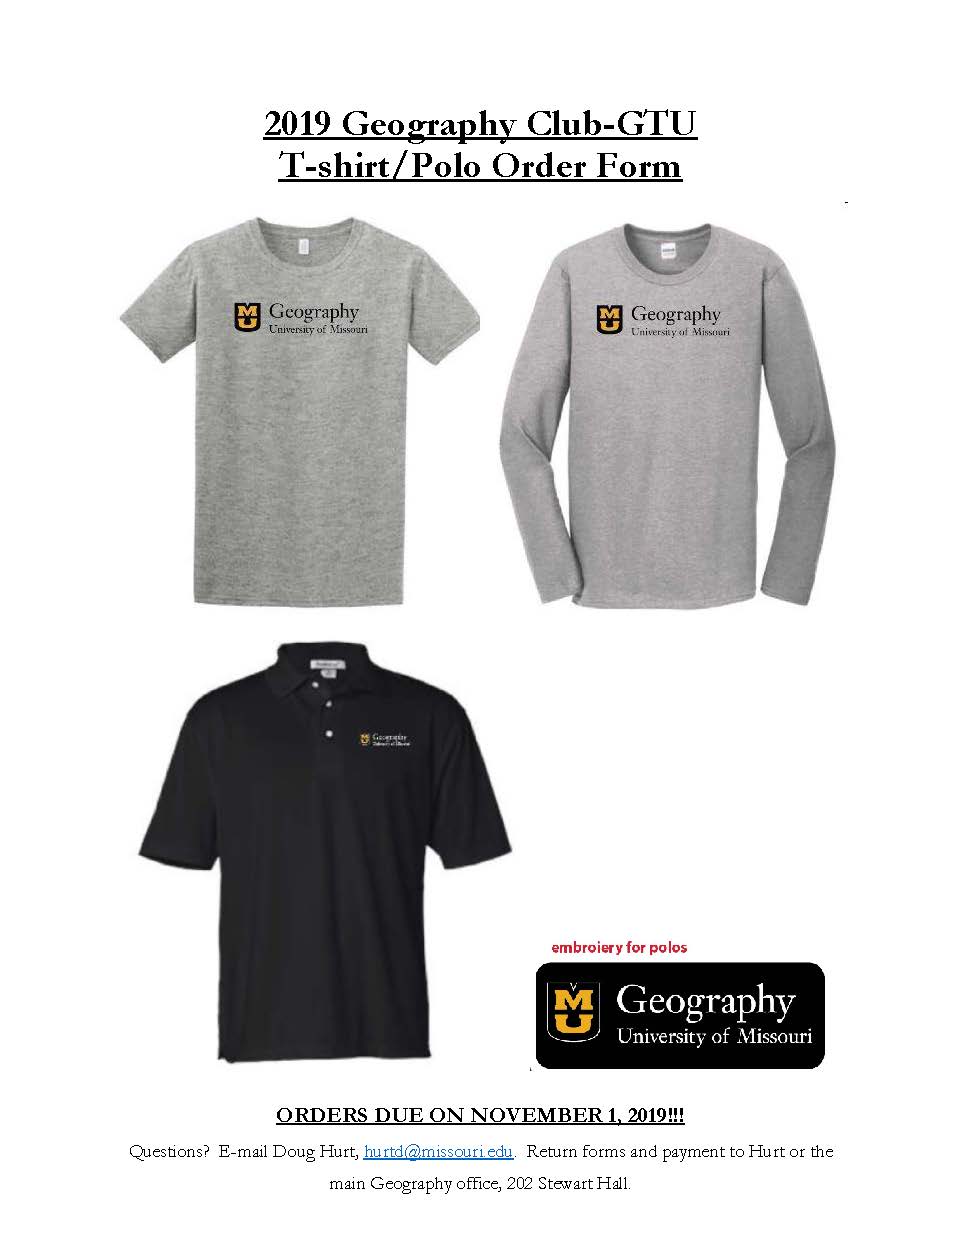 Geography T-Shirt and Polos Available Through Nov. 1, 2019